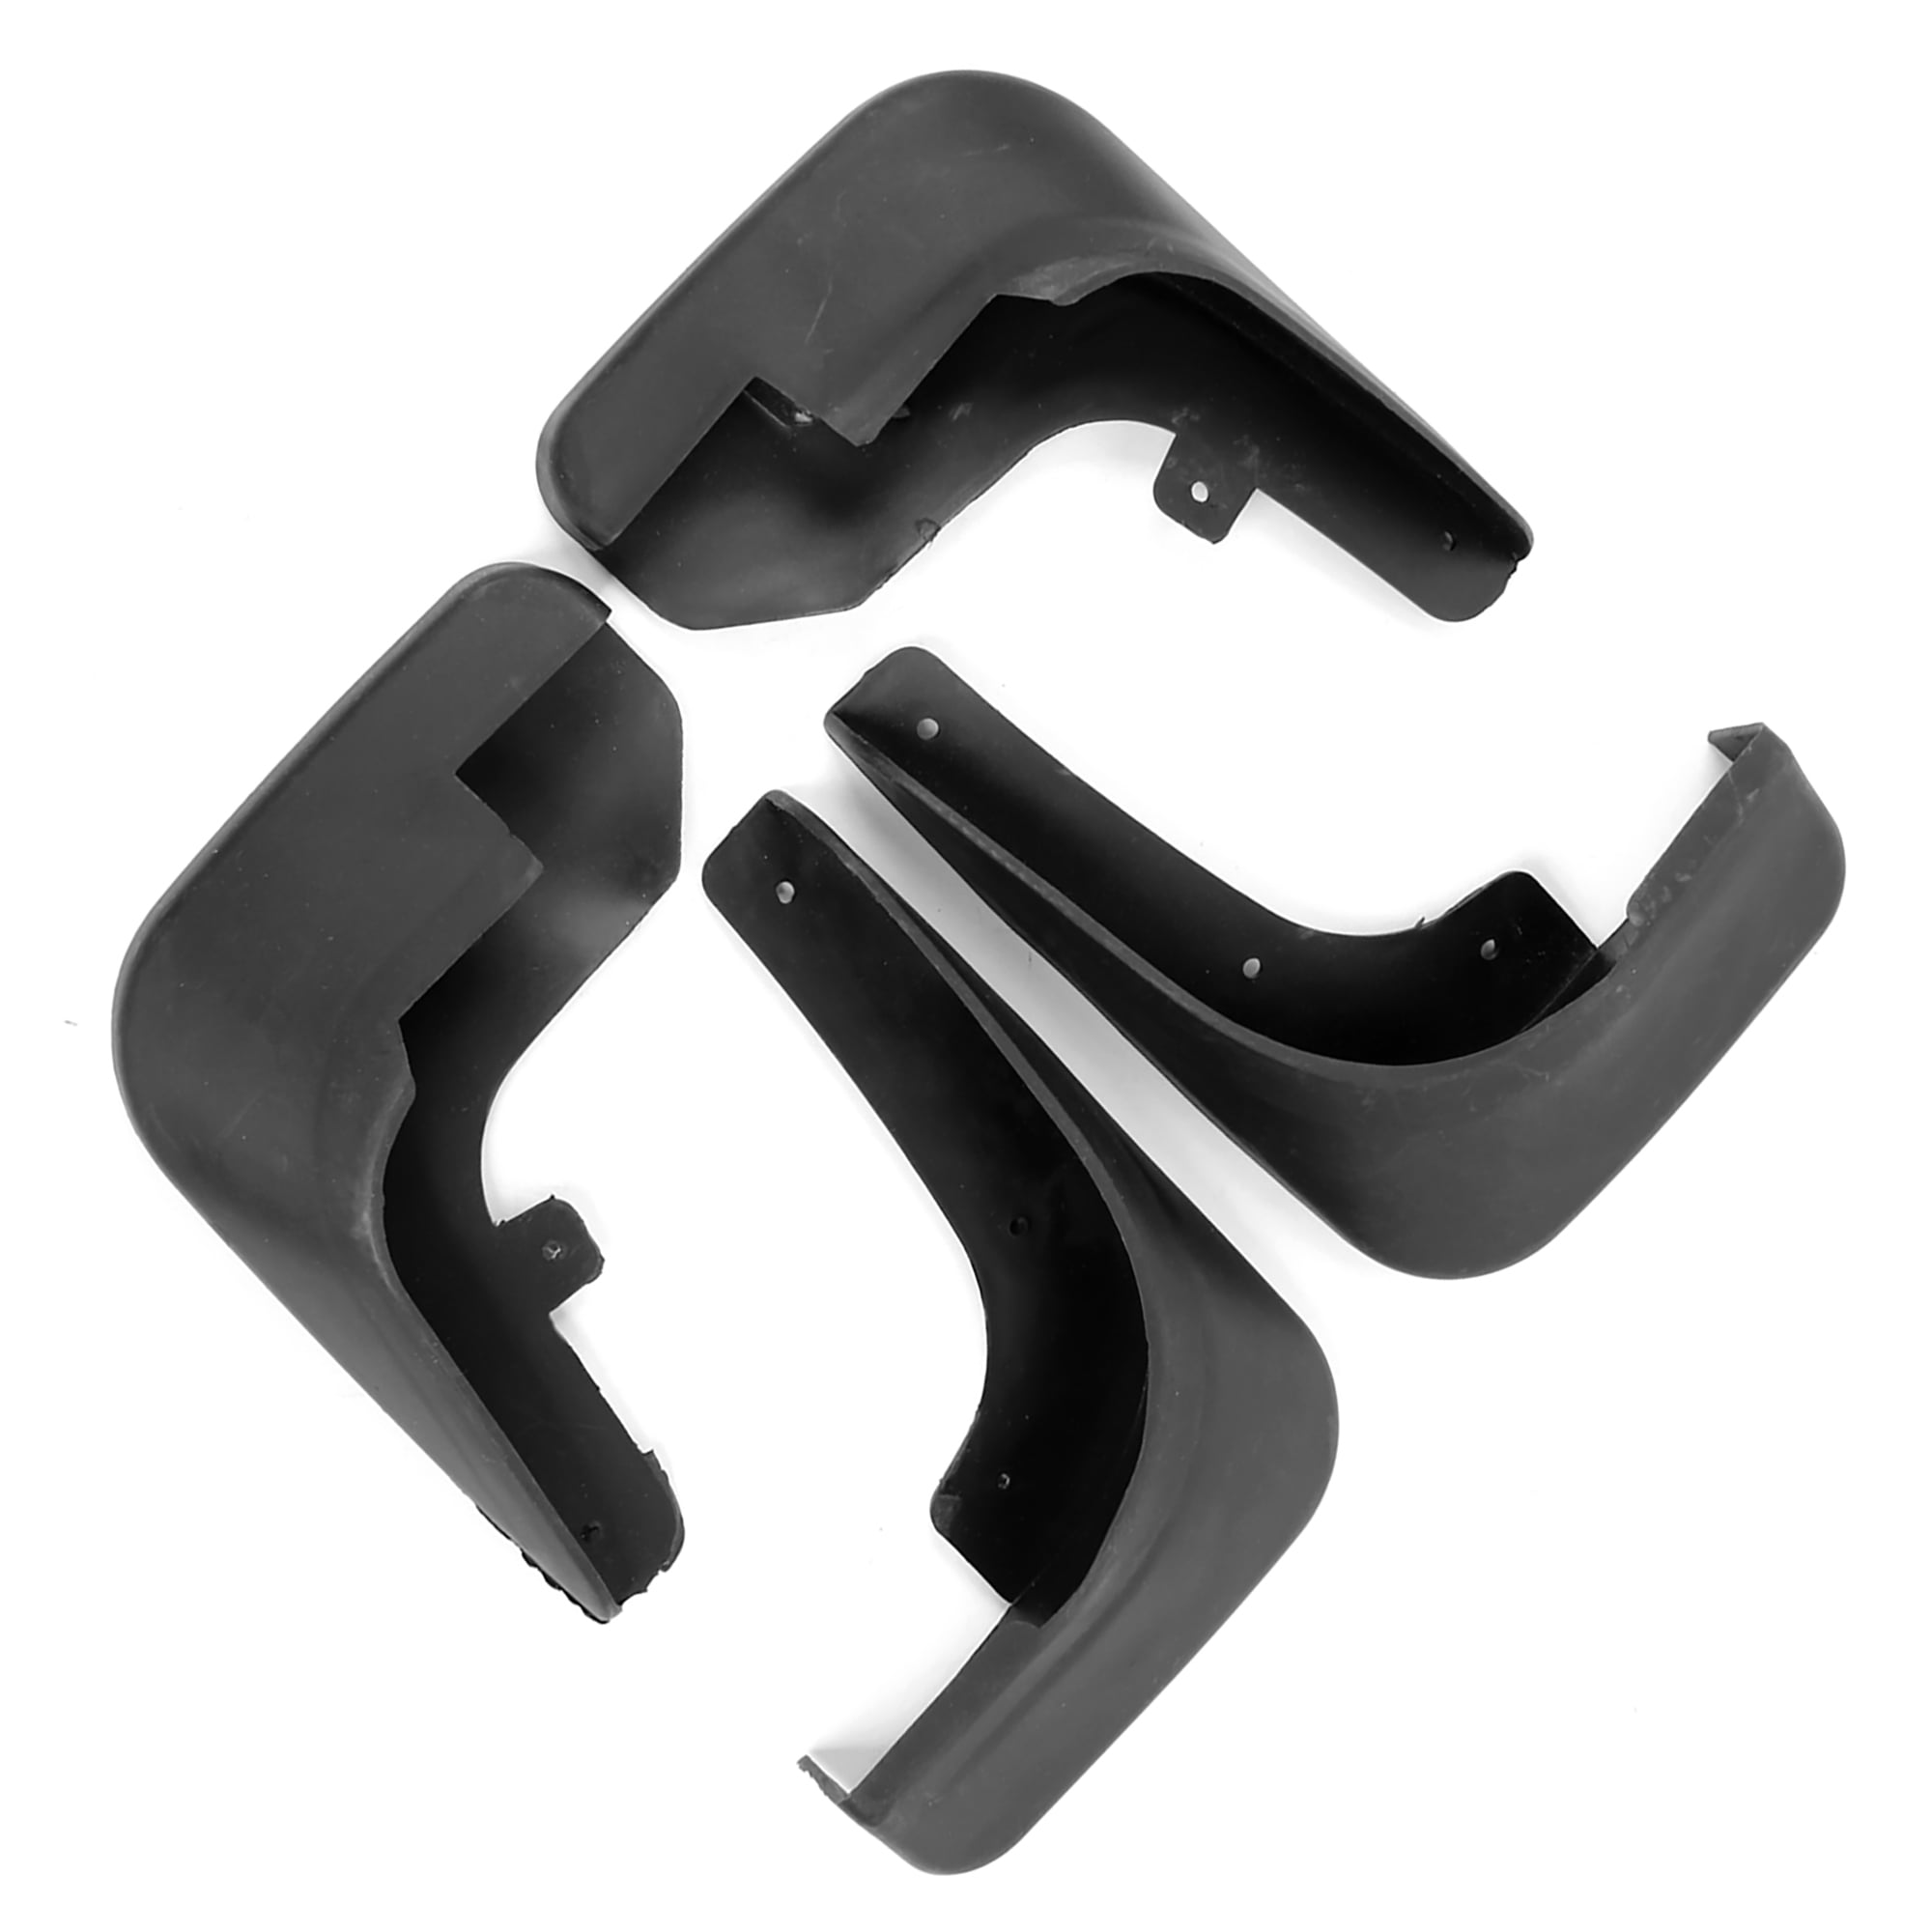 Set of 4 Car Rubber Front and Rear Mud Flaps, for Peugeot 207